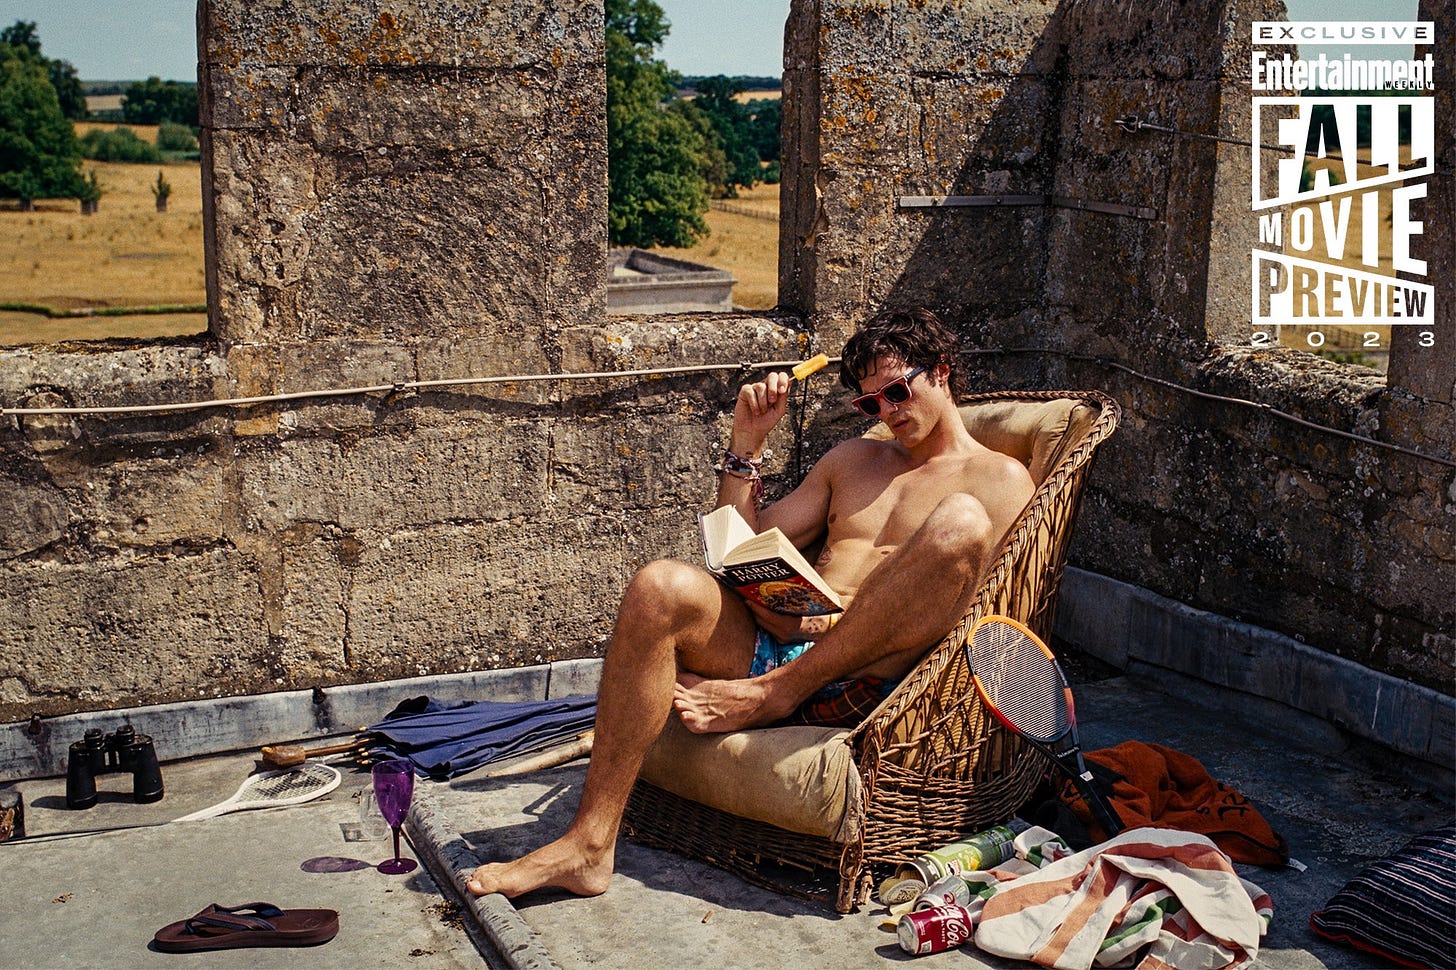 Jacob Elordi in his swim trunks lounging around in a chair reading Harry Potter.